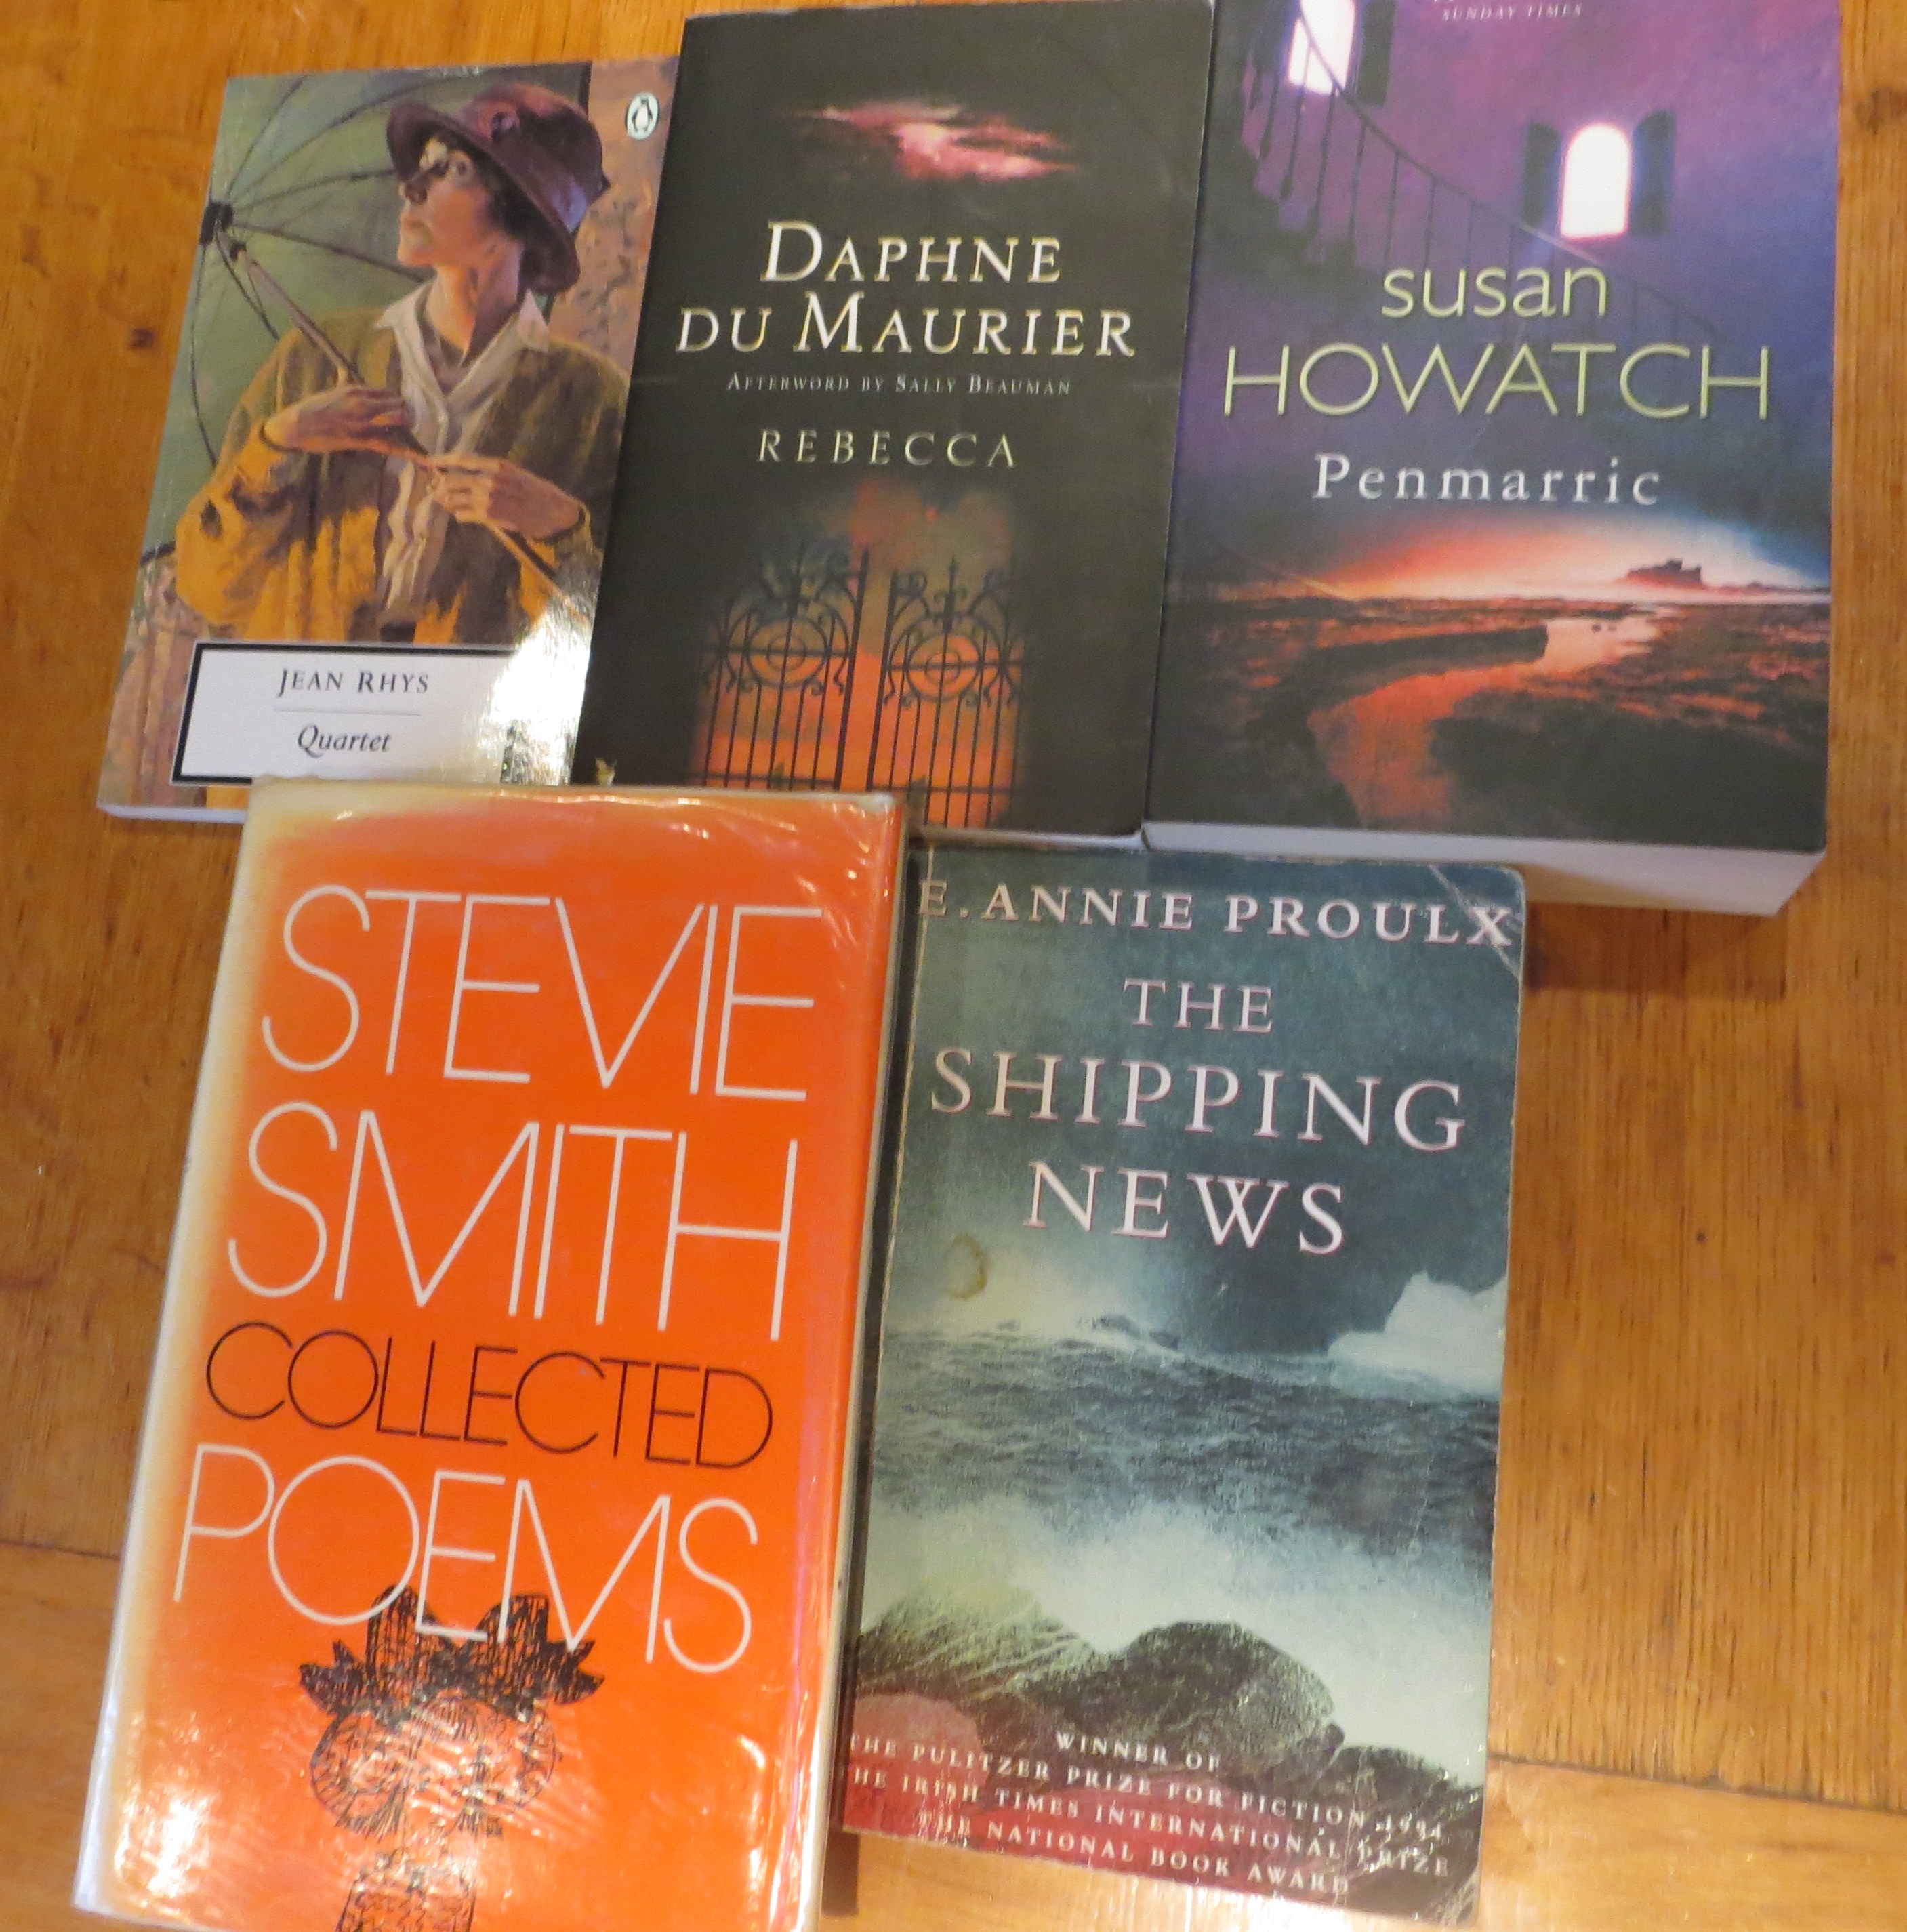 Books by Jean Rhys, Daphne du Maurier, Susan Howatch, Stevie Smith and E. Annie Proulx